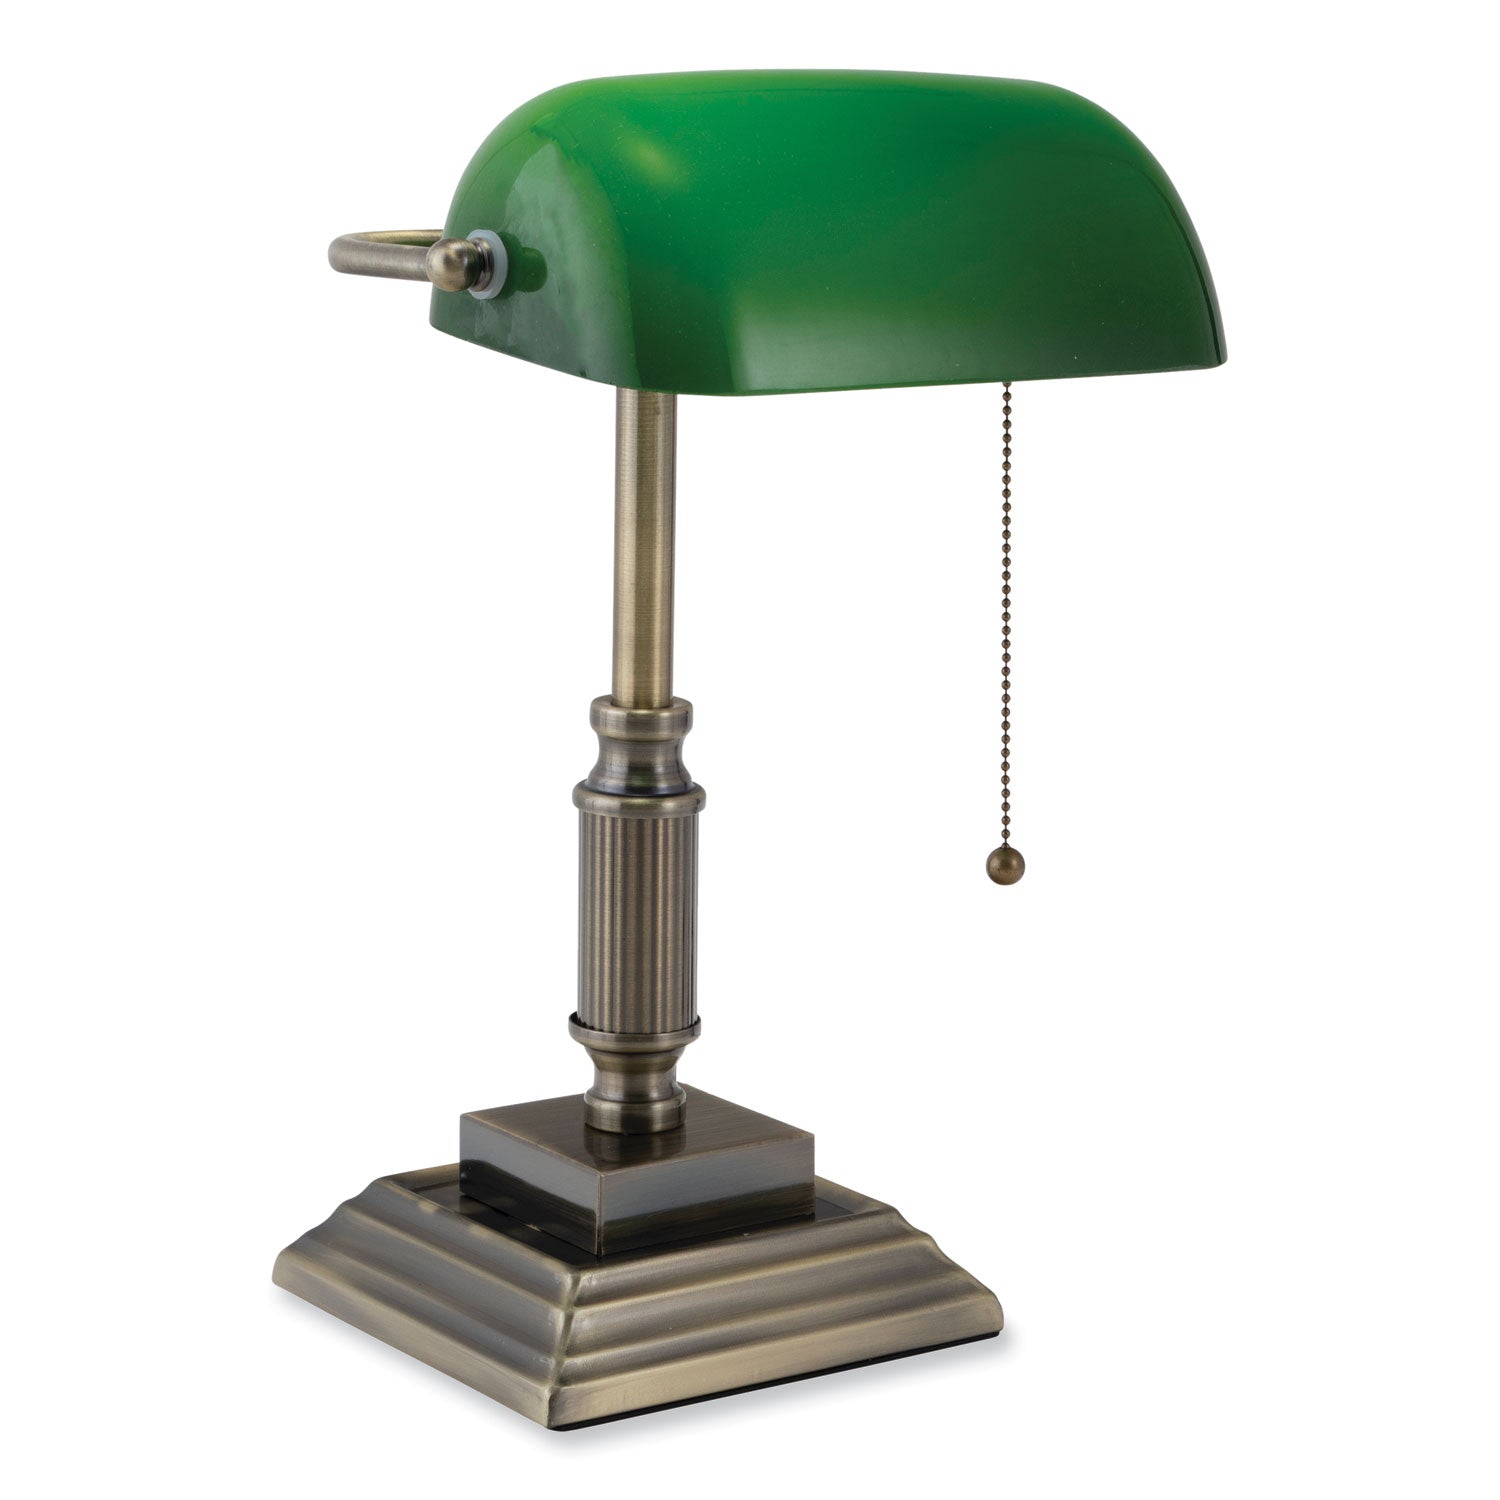 led-bankers-lamp-with-green-shade-candlestick-neck-1475-high-antique-bronze-ships-in-4-6-business-days_vlu9vs688029ab - 2